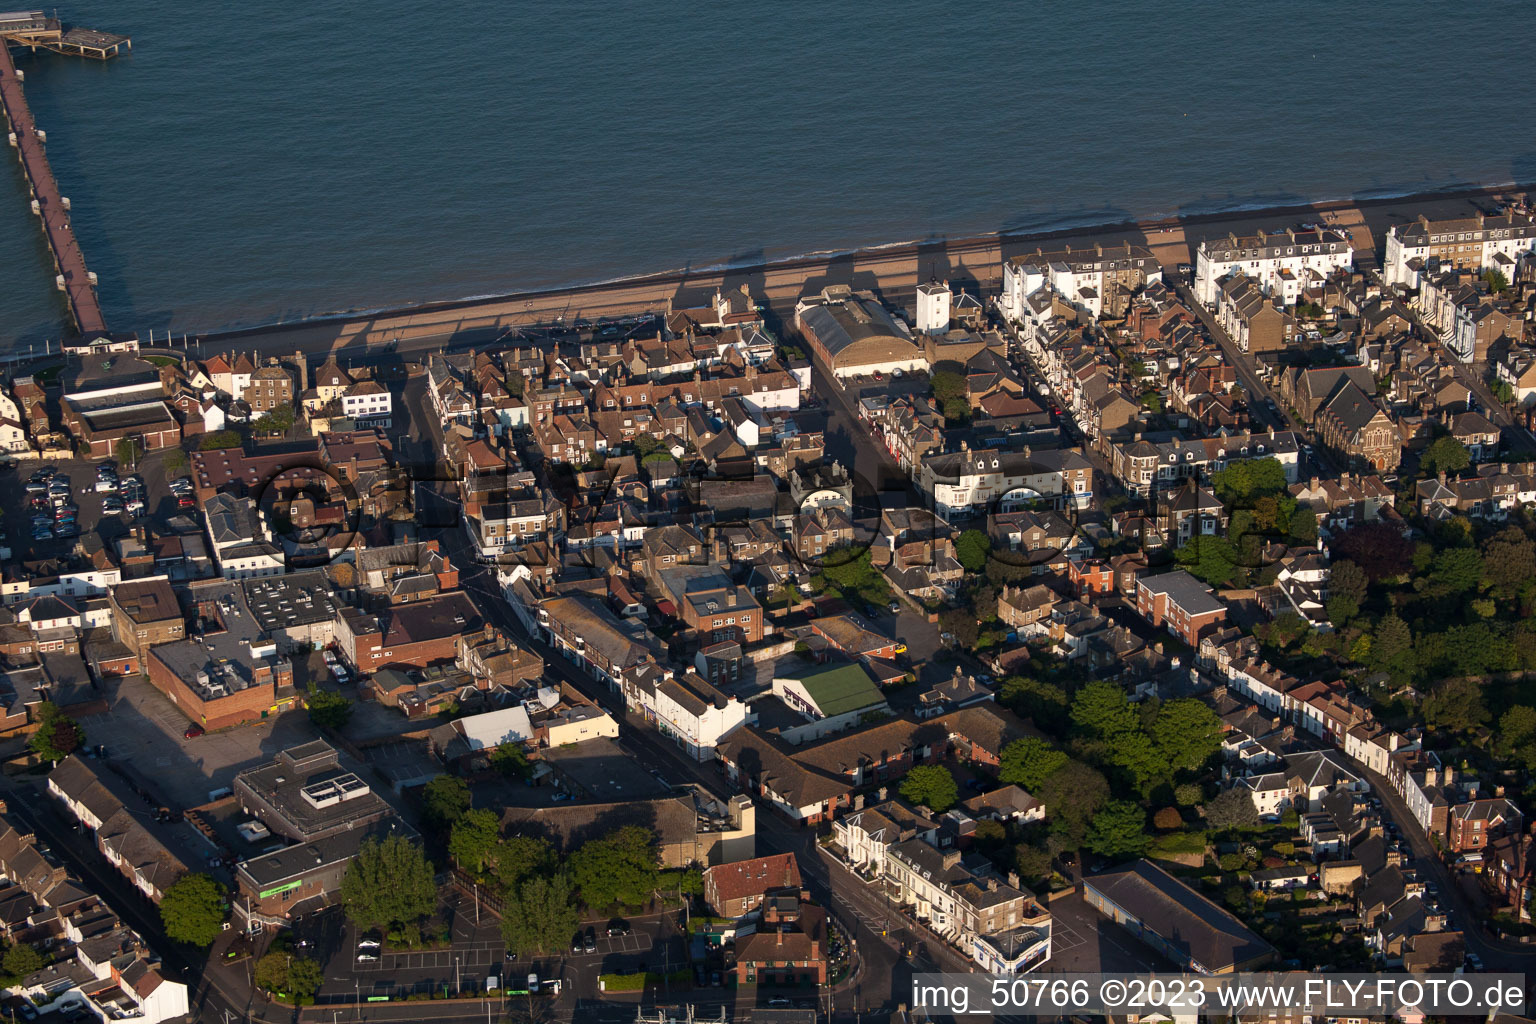 Deal in the state England, Great Britain viewn from the air